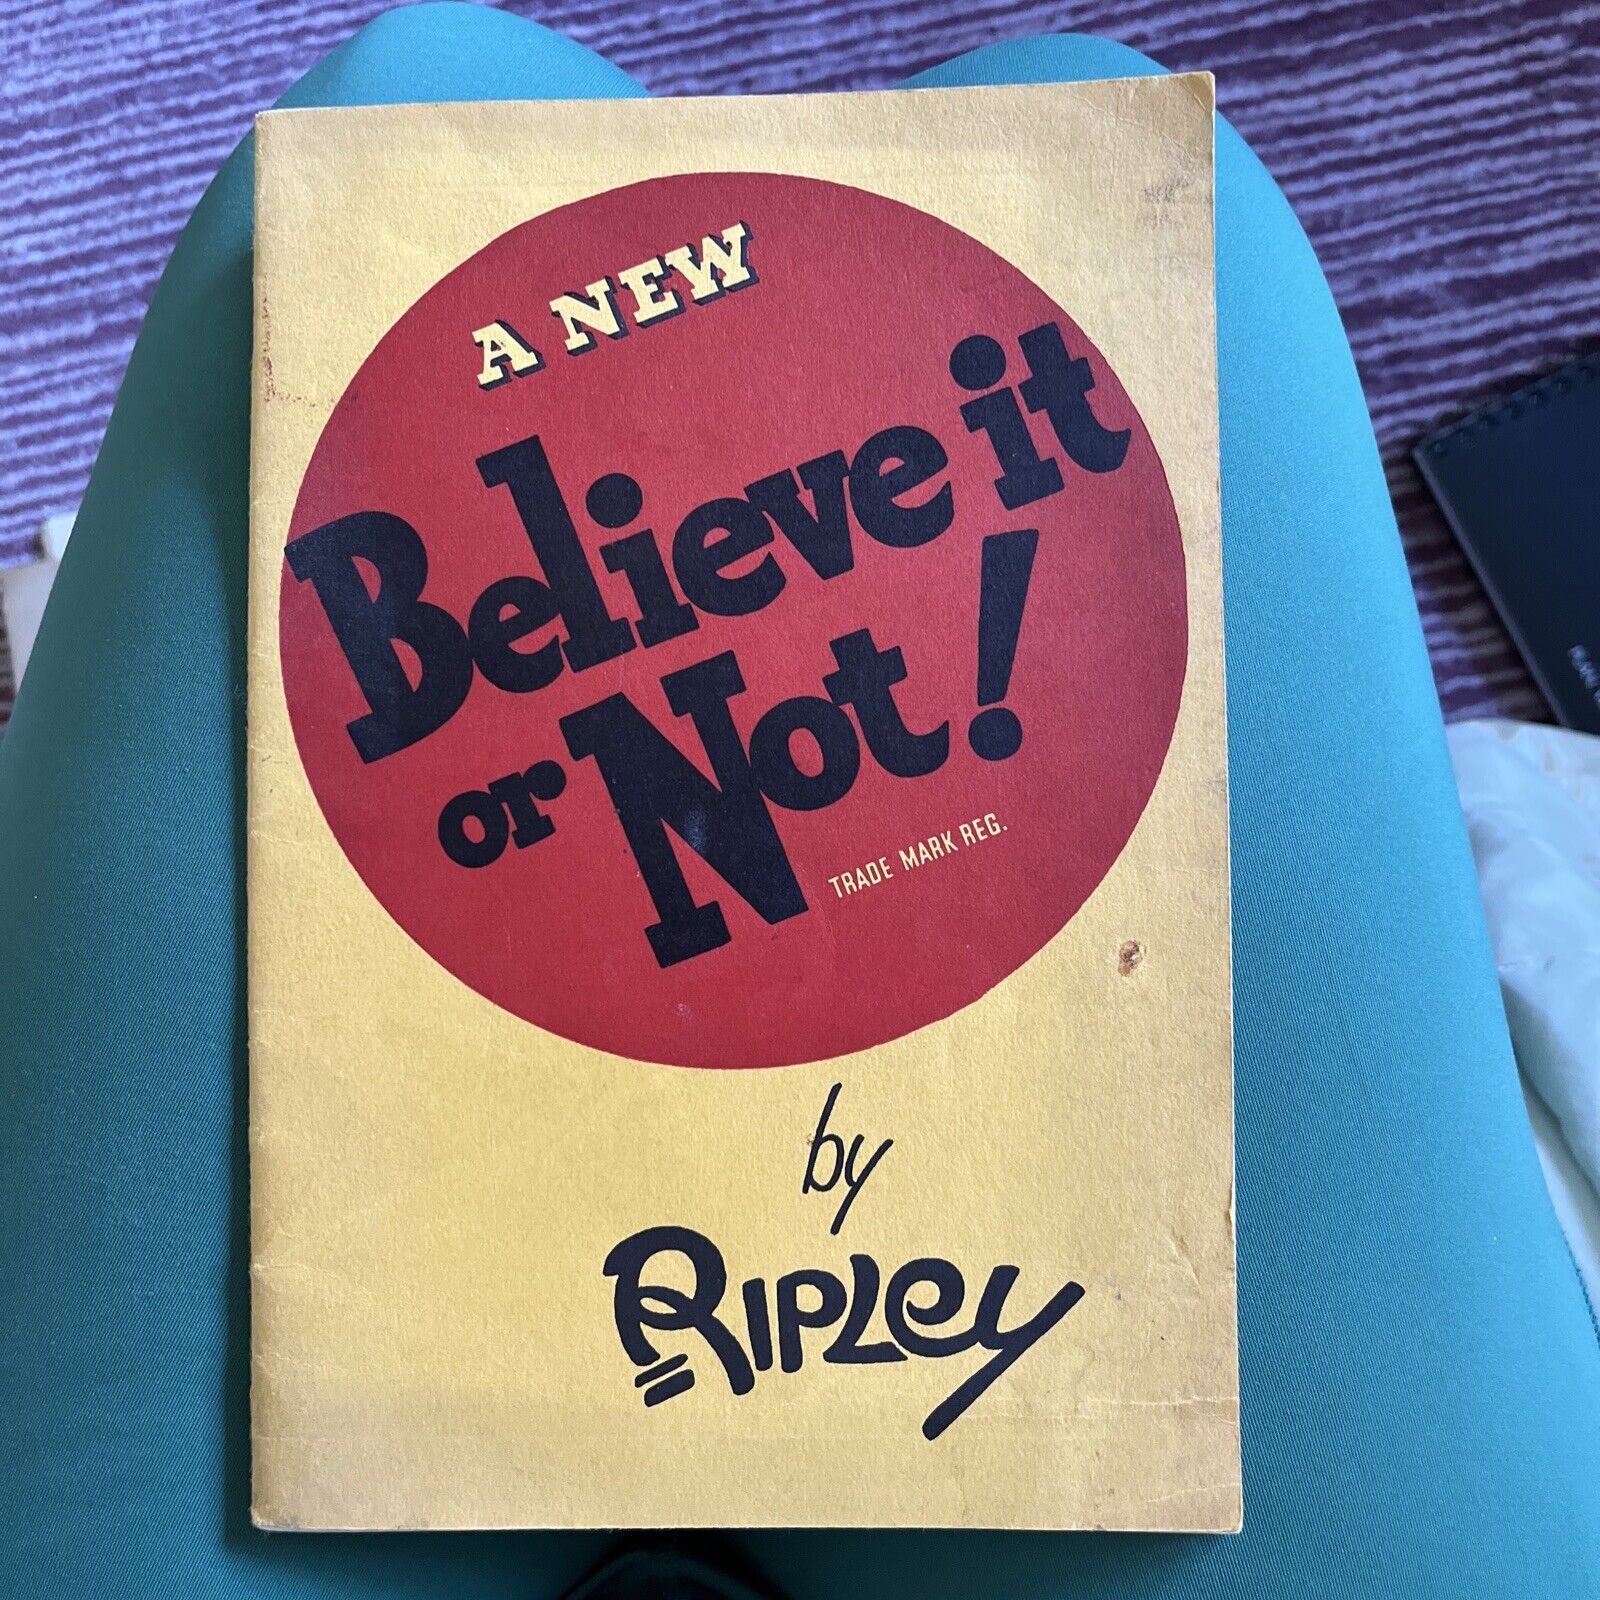 Vintage Original Book: 1930\'s a New BELIEVE IT OR NOT by RIPLEY Good, 32pgs